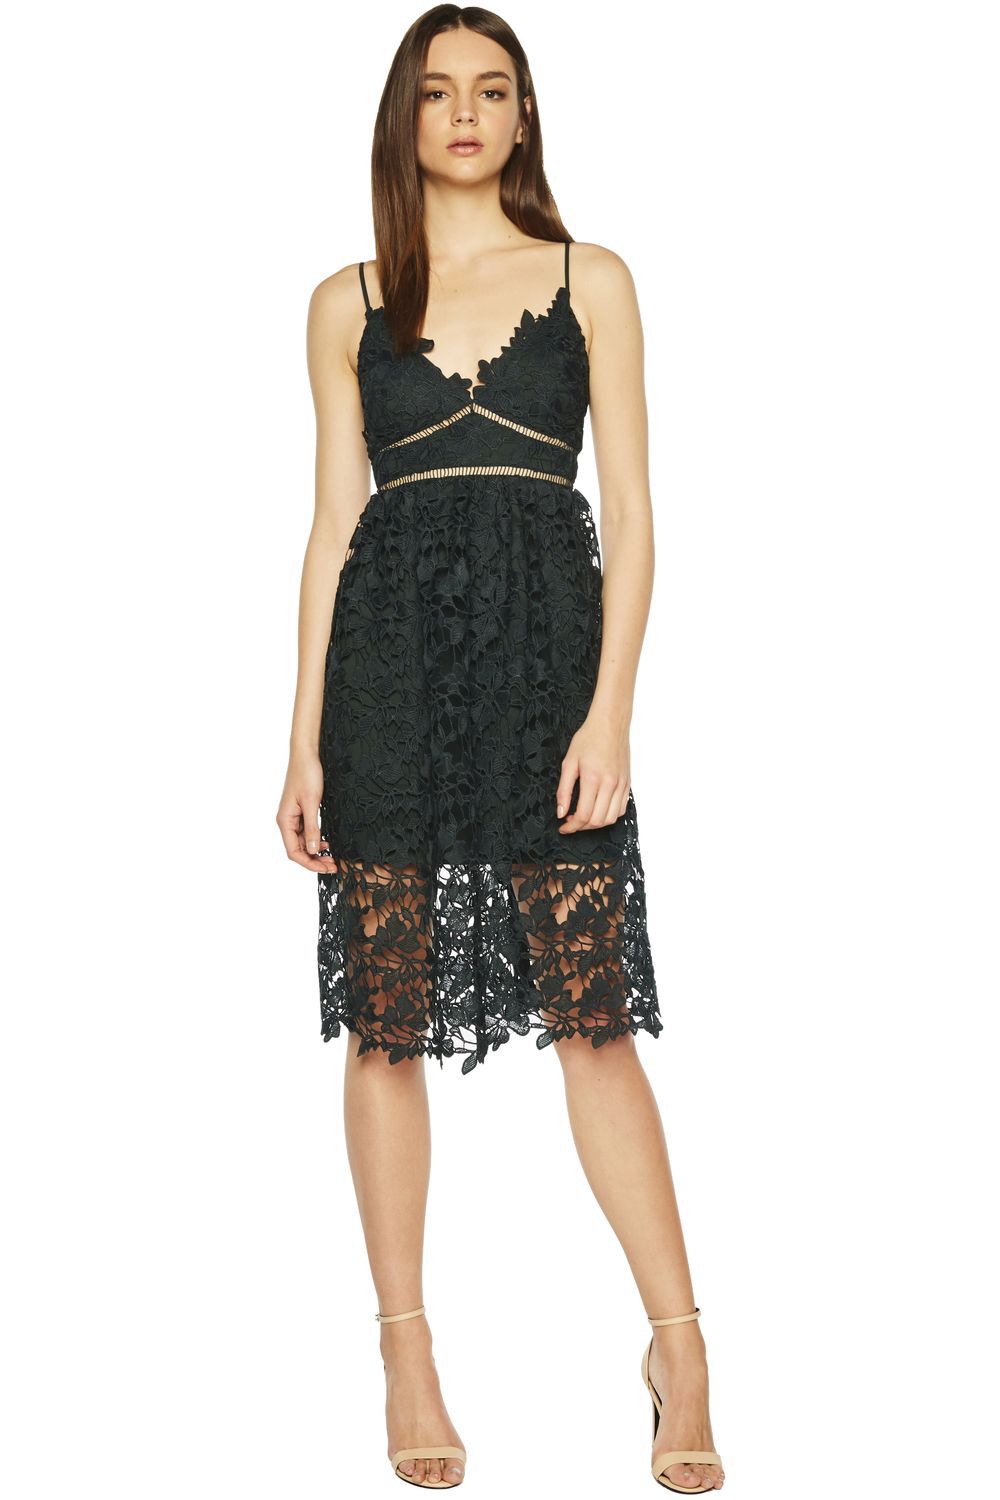 Sonya Lace Dress in Forest | Bardot